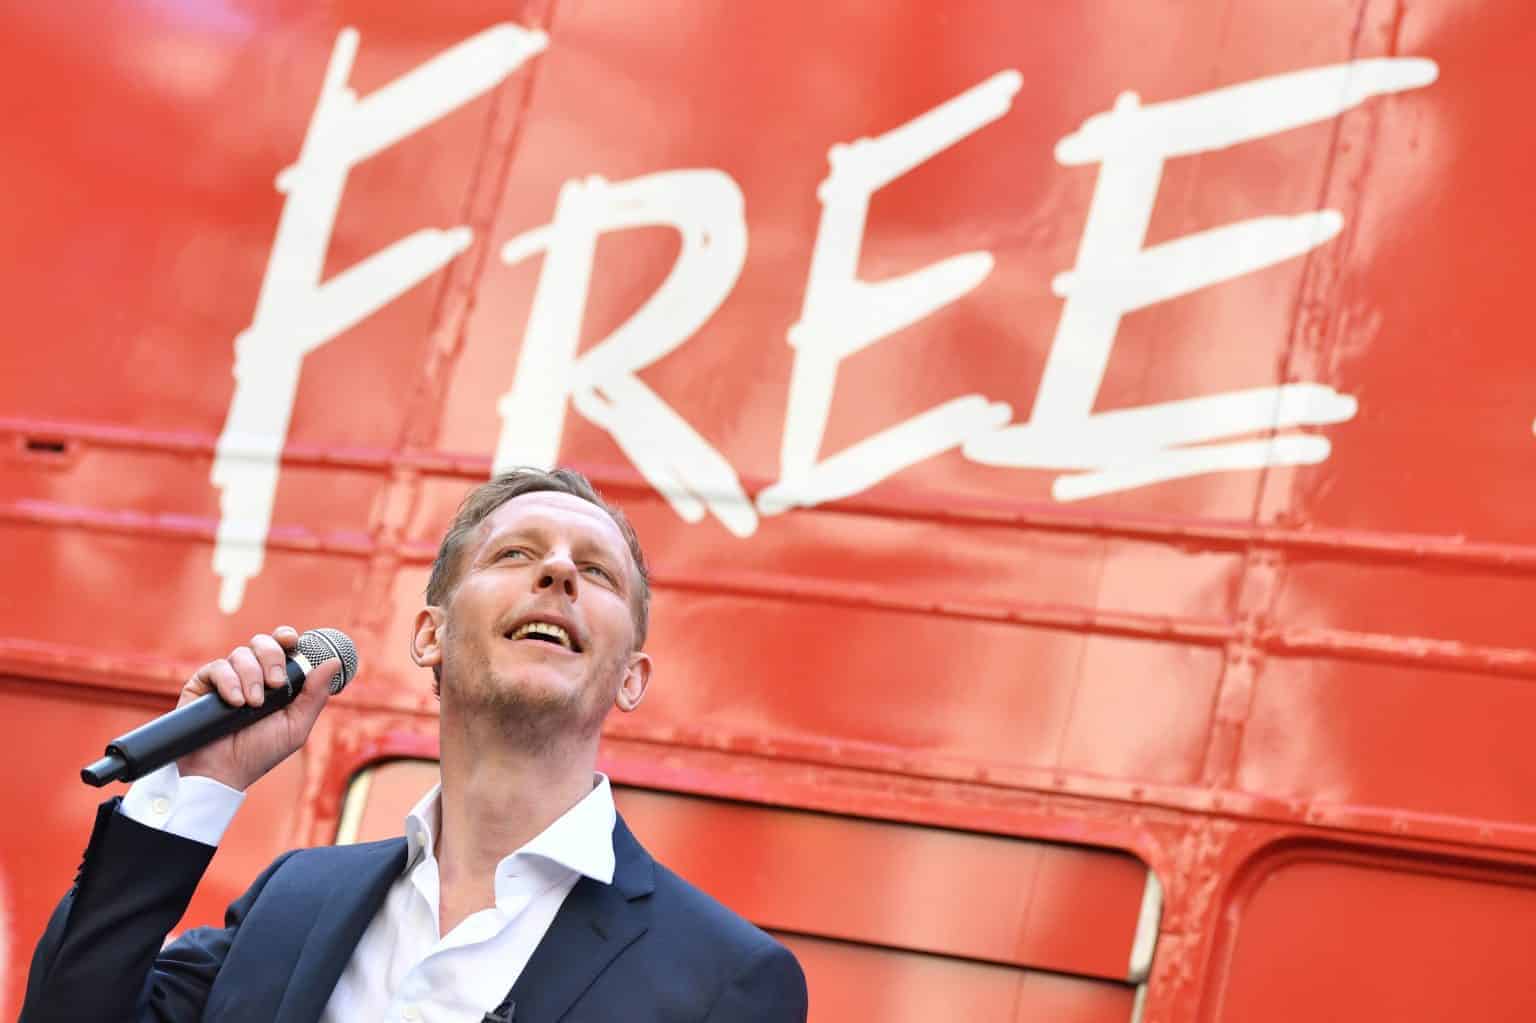 Twitter locks Laurence Fox’s account following backlash over profile picture